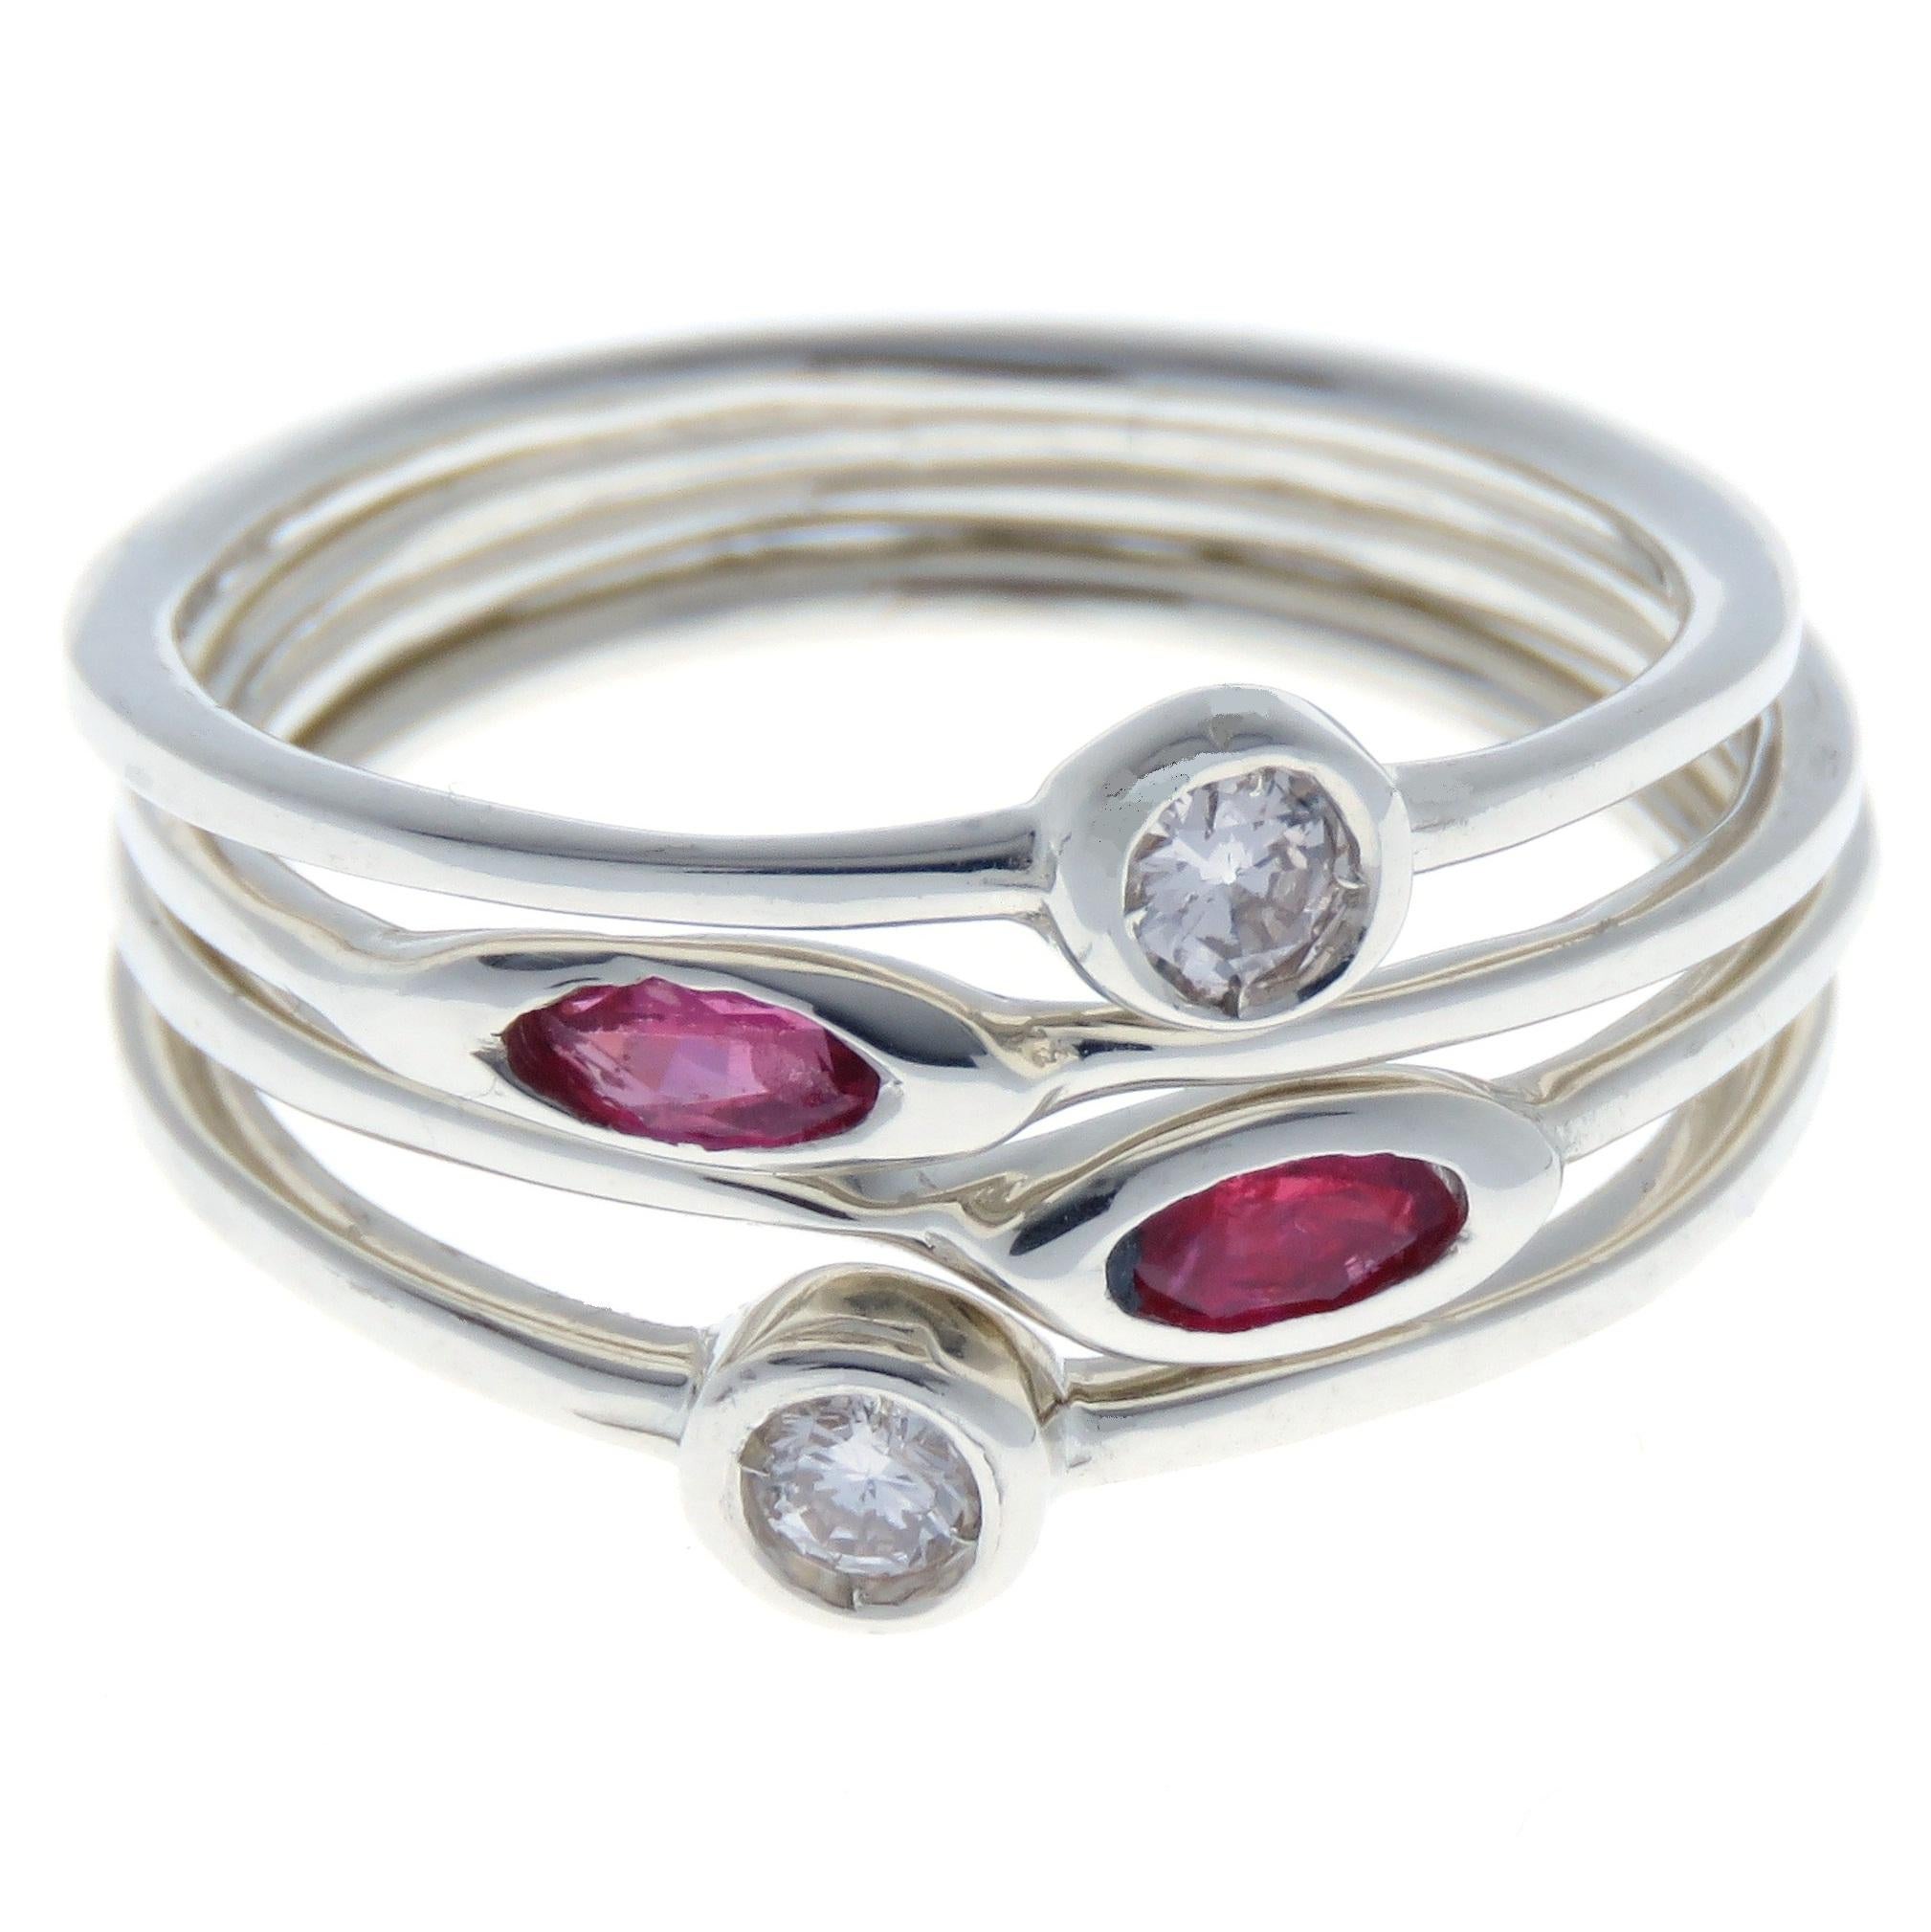 Modern Rubies Diamonds White Gold Stacking Ring Handcrafted in Italy by Botta Gioielli